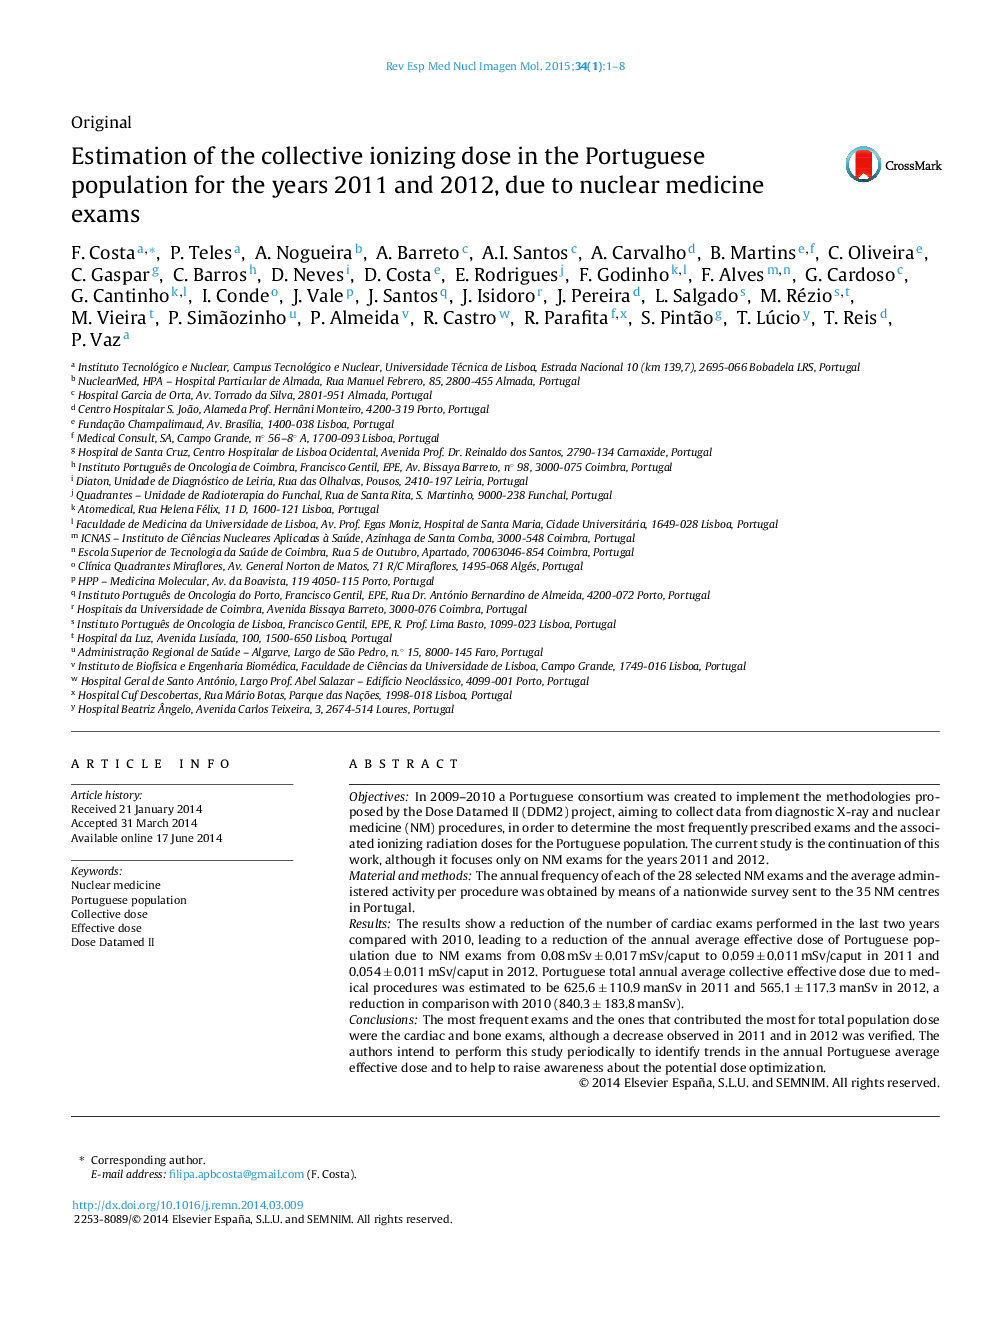 Estimation of the collective ionizing dose in the Portuguese population for the years 2011 and 2012, due to nuclear medicine exams